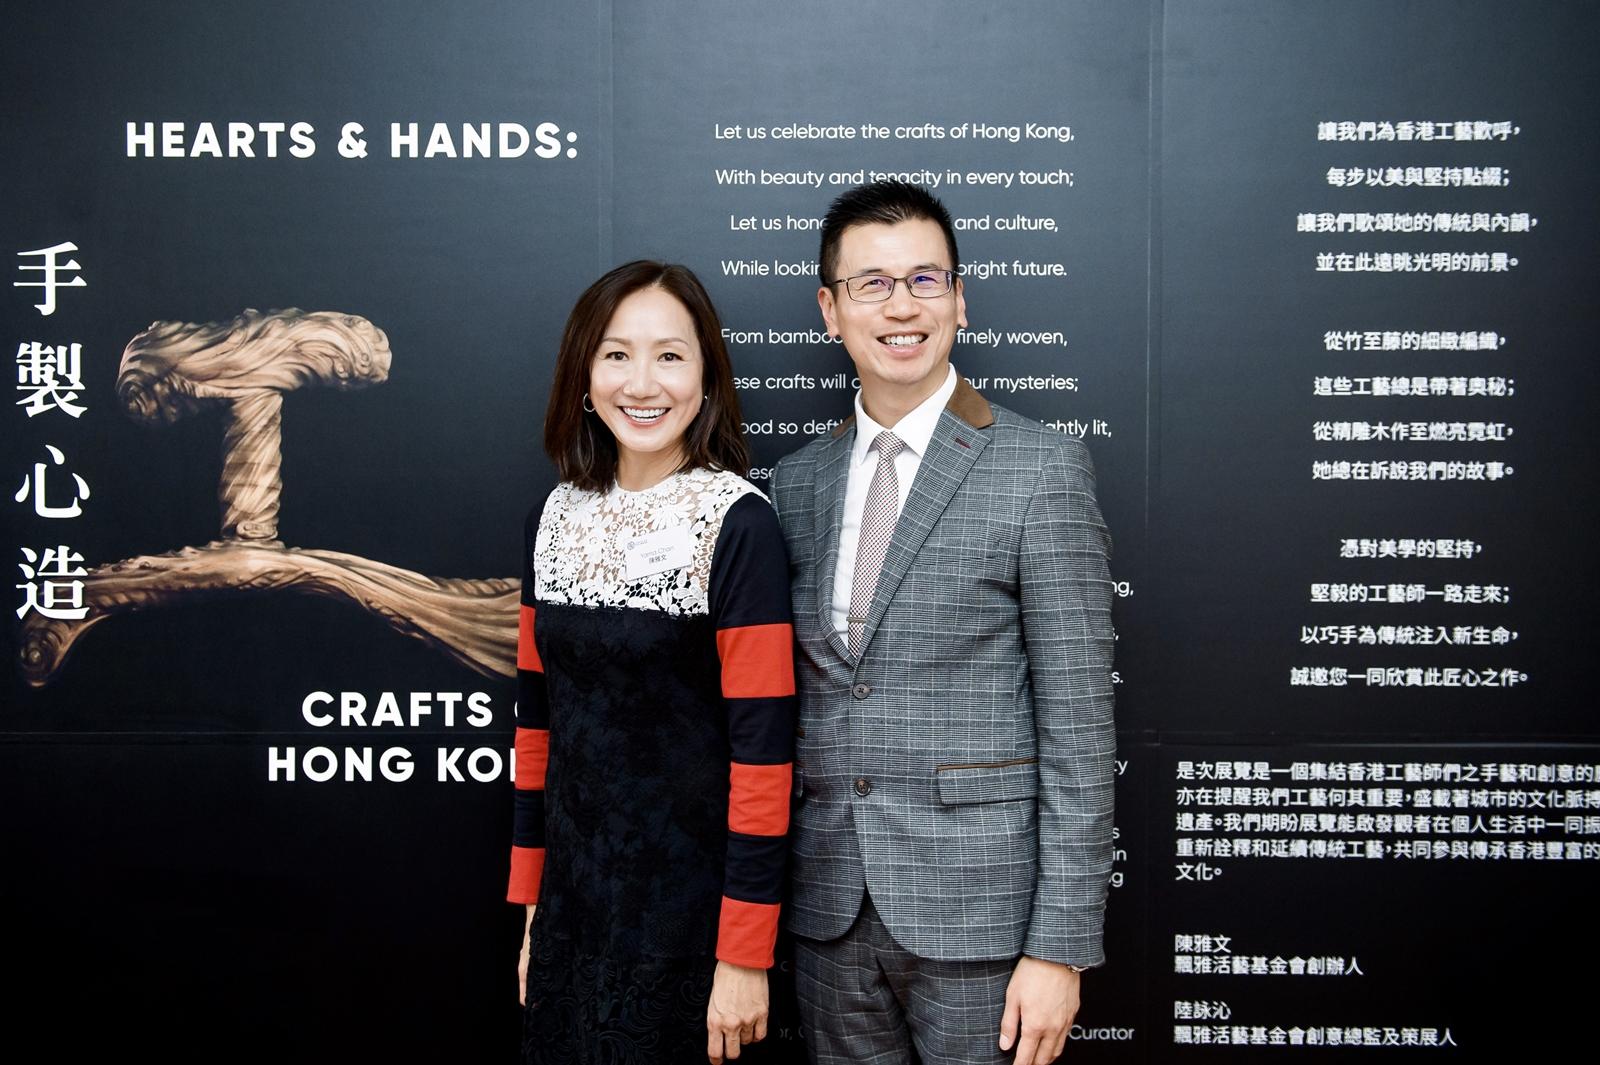 The Hong Kong Economic and Trade Office, London (London ETO), supported Crafts on Peel, a charitable organisation in Hong Kong, to join the London Craft Week 2023, bringing the "Hearts & Hands: Crafts of Hong Kong" exhibition to London. Photo shows the Director-General of London ETO, Mr Gilford Law (right), and Crafts on Peel’s founder, Ms Yama Chan (left), at a reception of the exhibition on May 9 (London time).